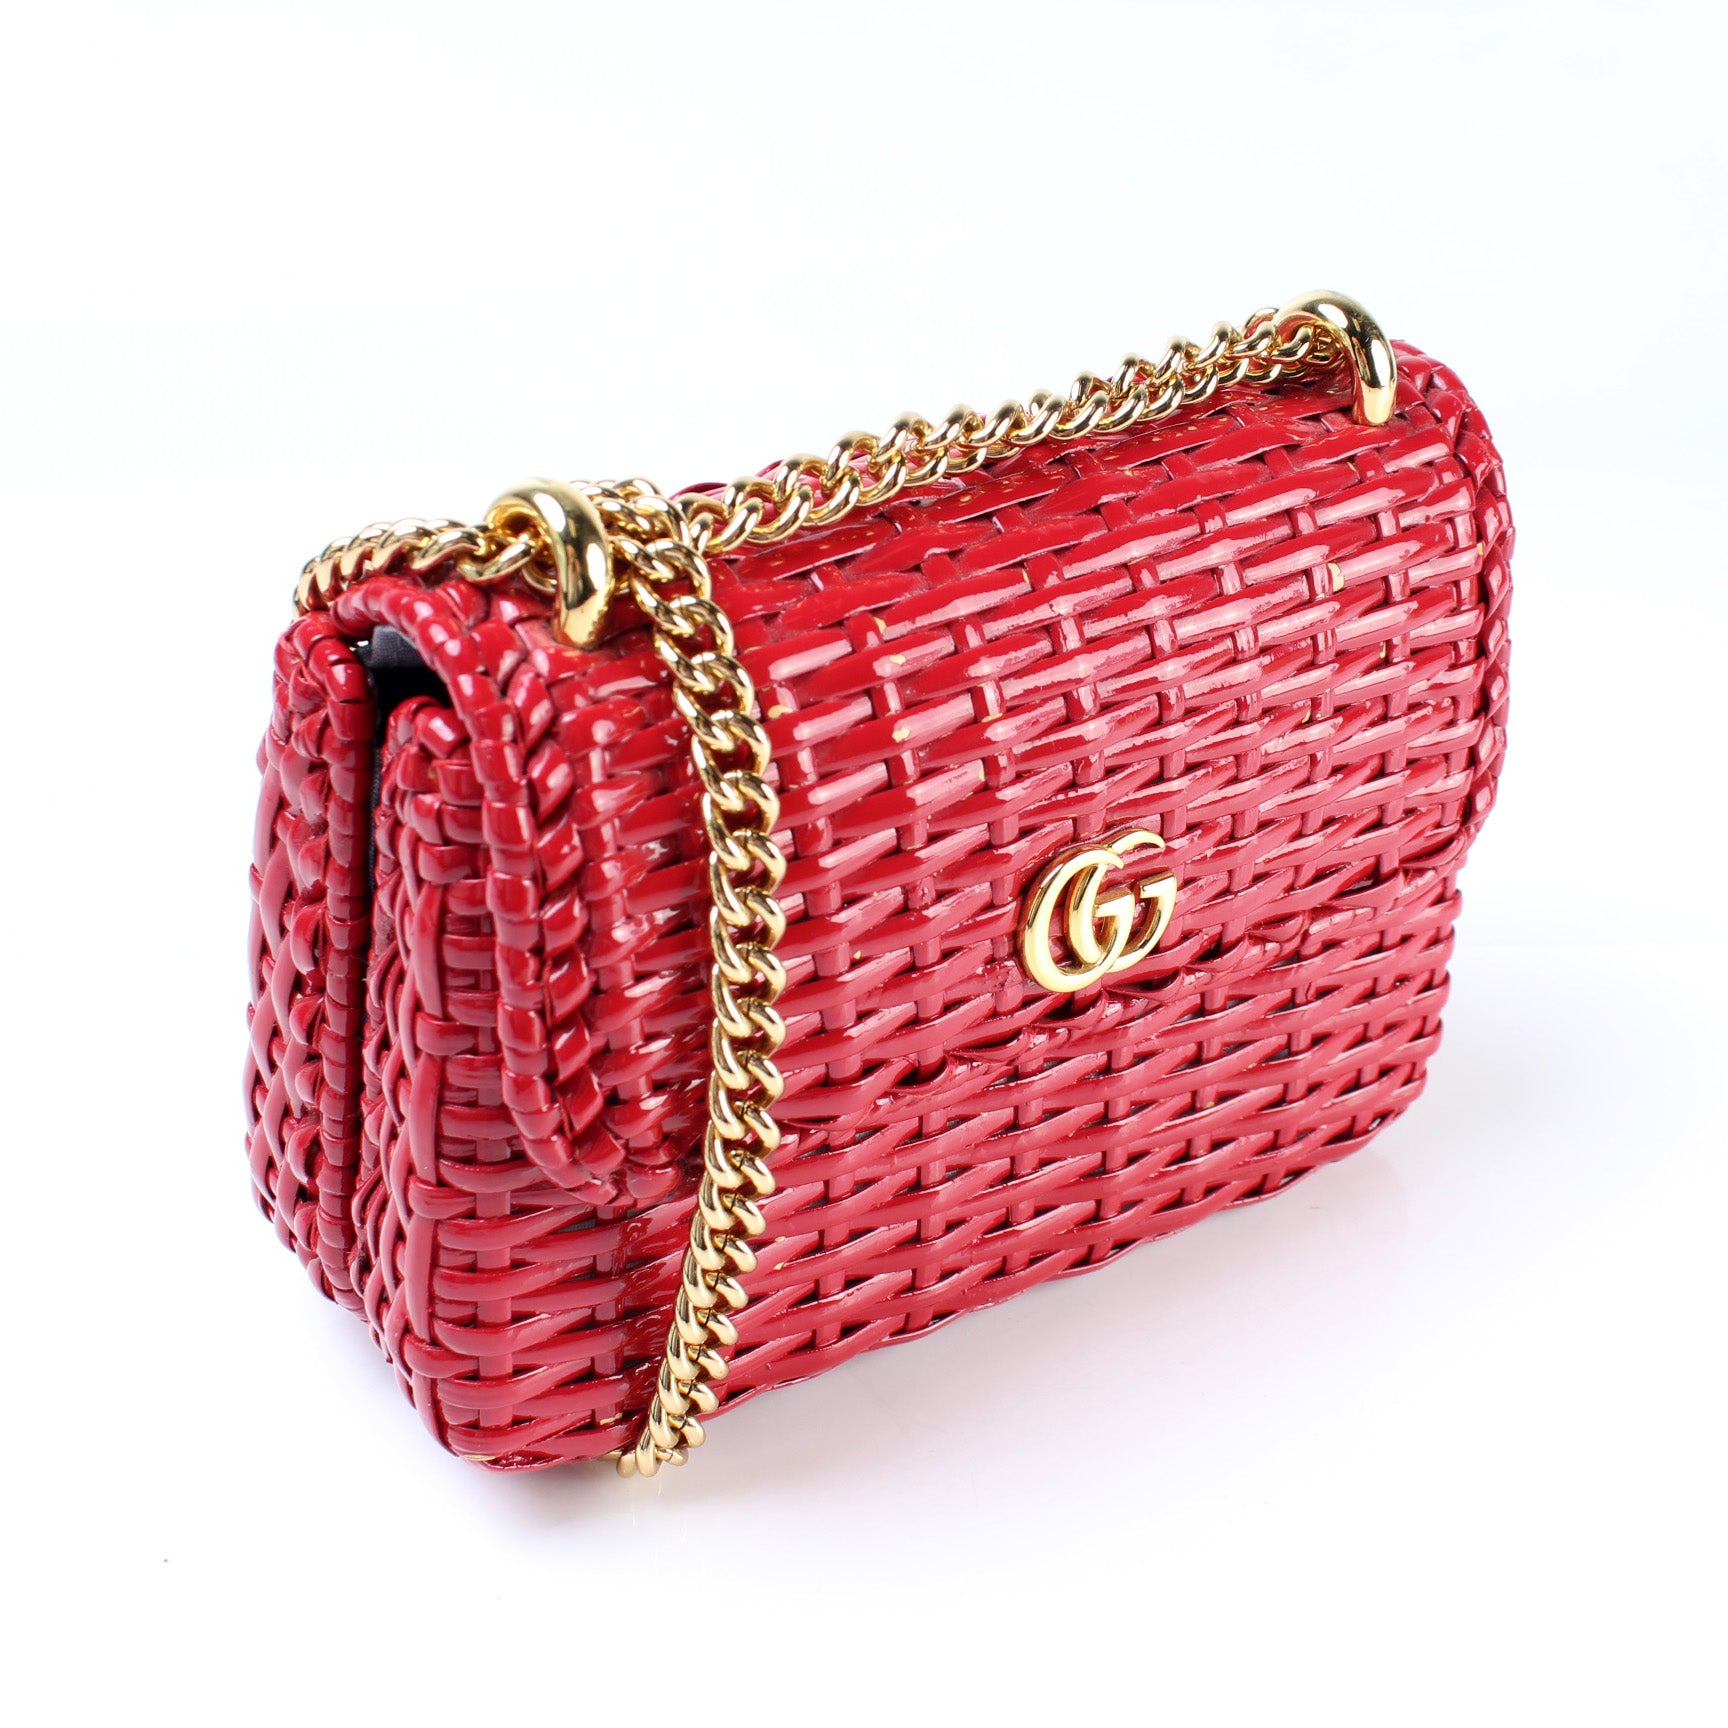 Gucci Small Linea Cestino Glazed Wicker Shoulder Bag available at